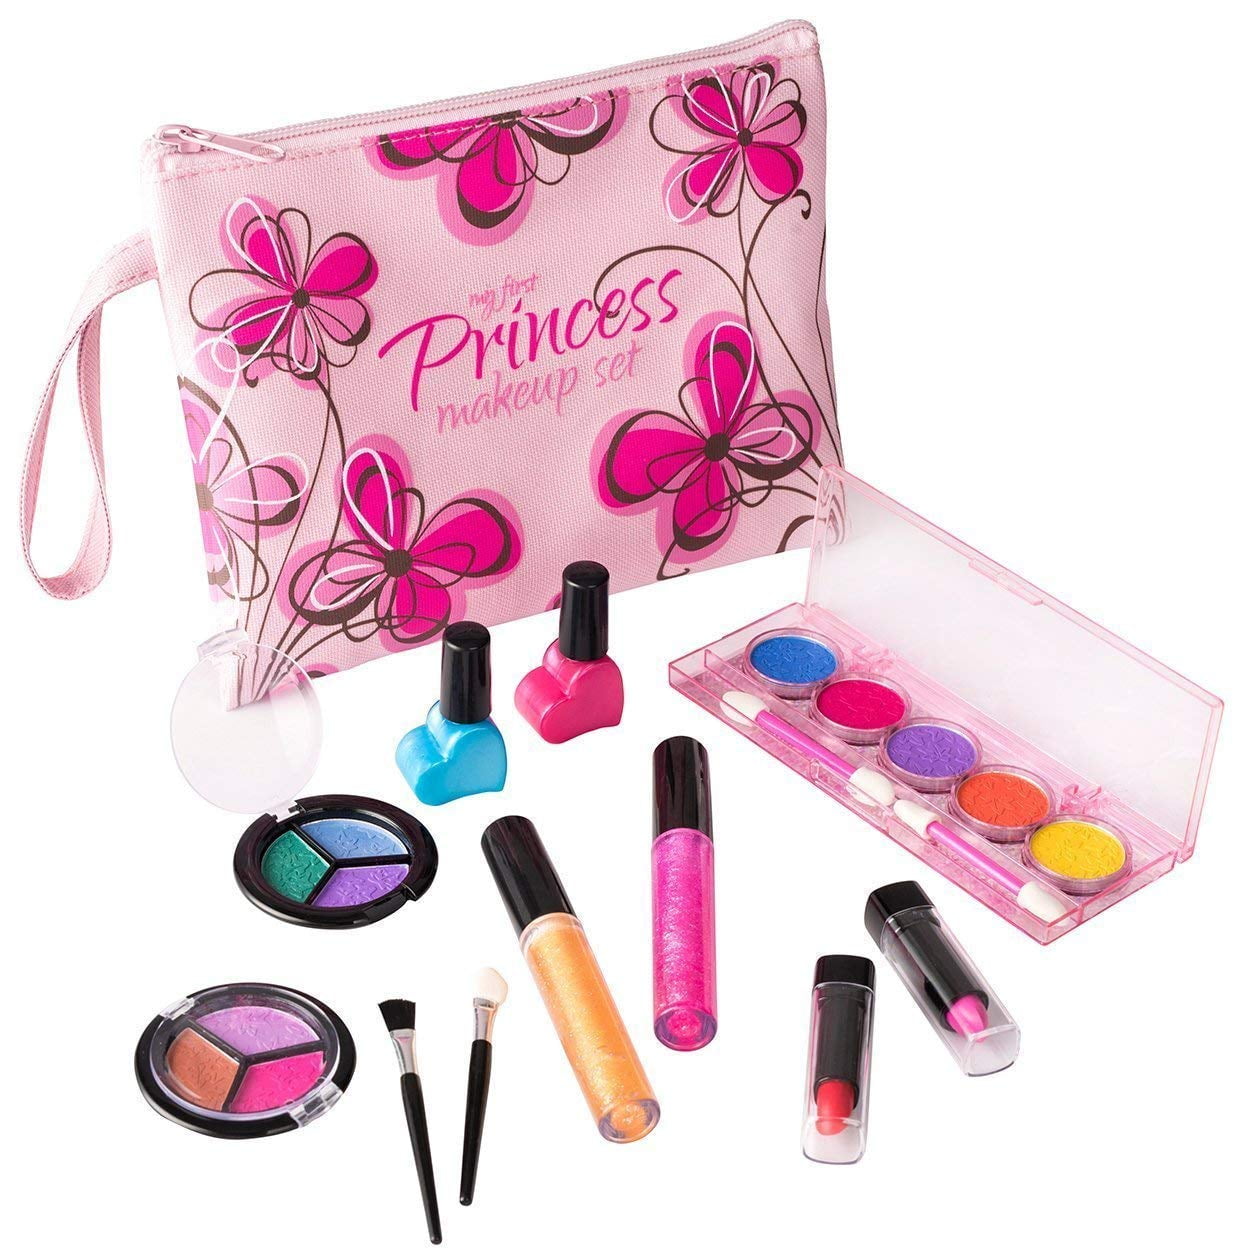 Includes 15 Pieces Makeup Palette In A Fun KreativeKraft Makeup Sets For Girls 